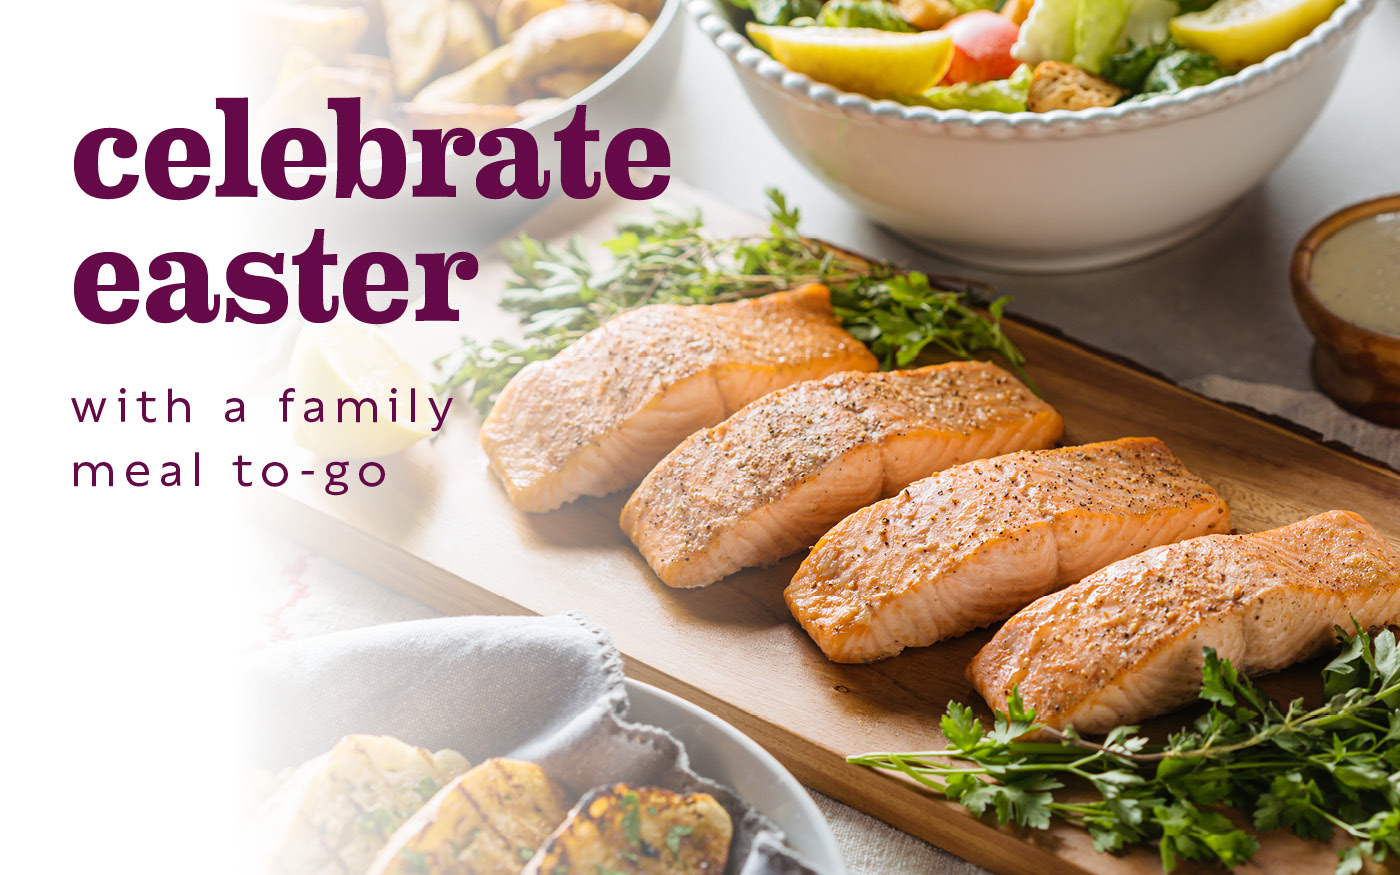 Celebrate Easter with Urban Plates Family Meals